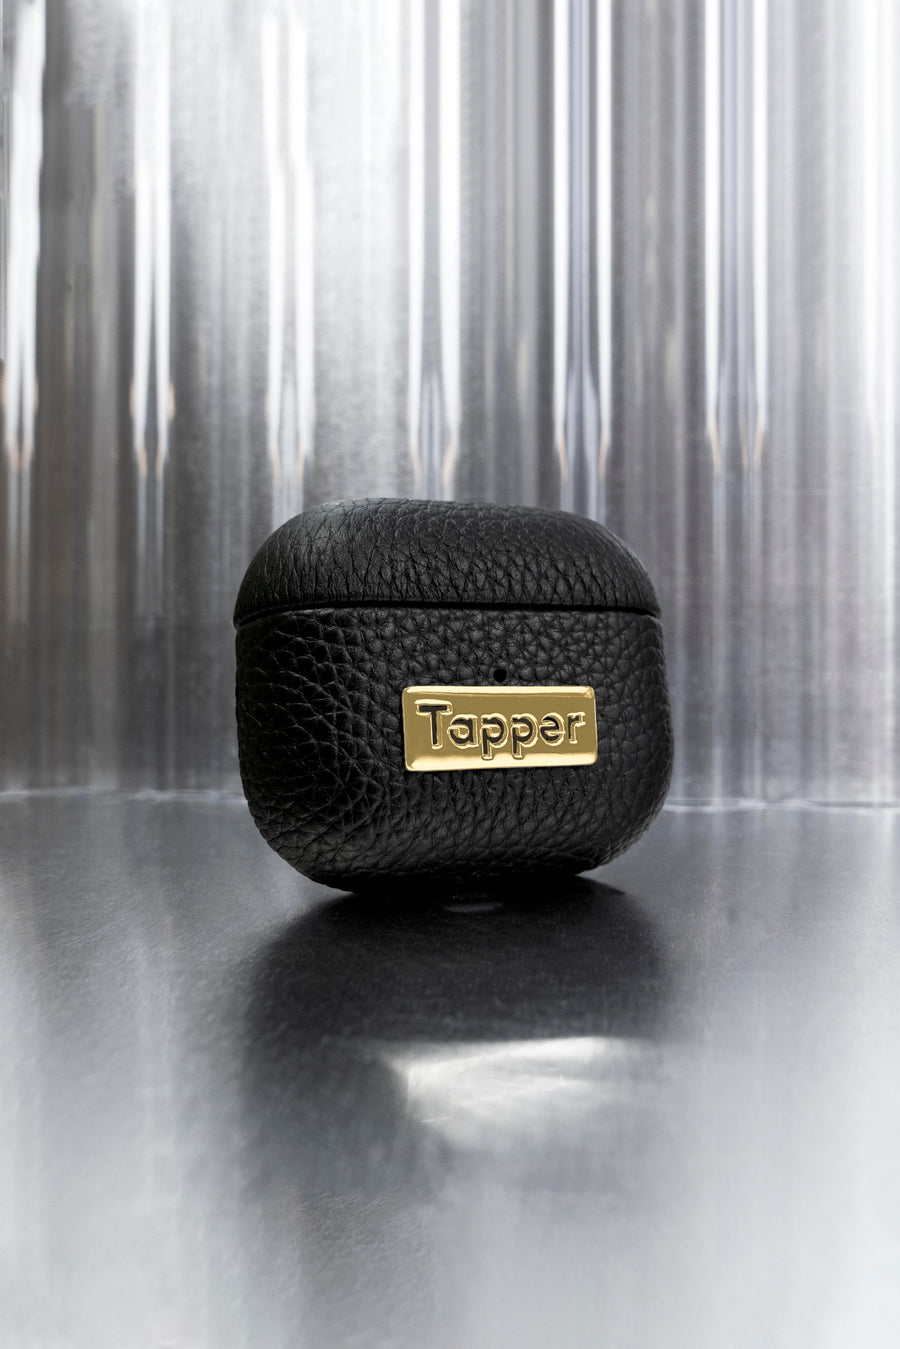 Tapper's luxurious black genuine cow leather AirPods case protects and elevates the look of your AirPods. The luxurious, protective case for AirPods with a metal logo plate in real 18k gold plating steps up your AirPods game. The next must-have high end protective Apple AirPods accessory in real leather and precious metals. Compatible with AirPods (3rd generation). Designed in Sweden by Tapper. Free Express Shipping at gettapper.com